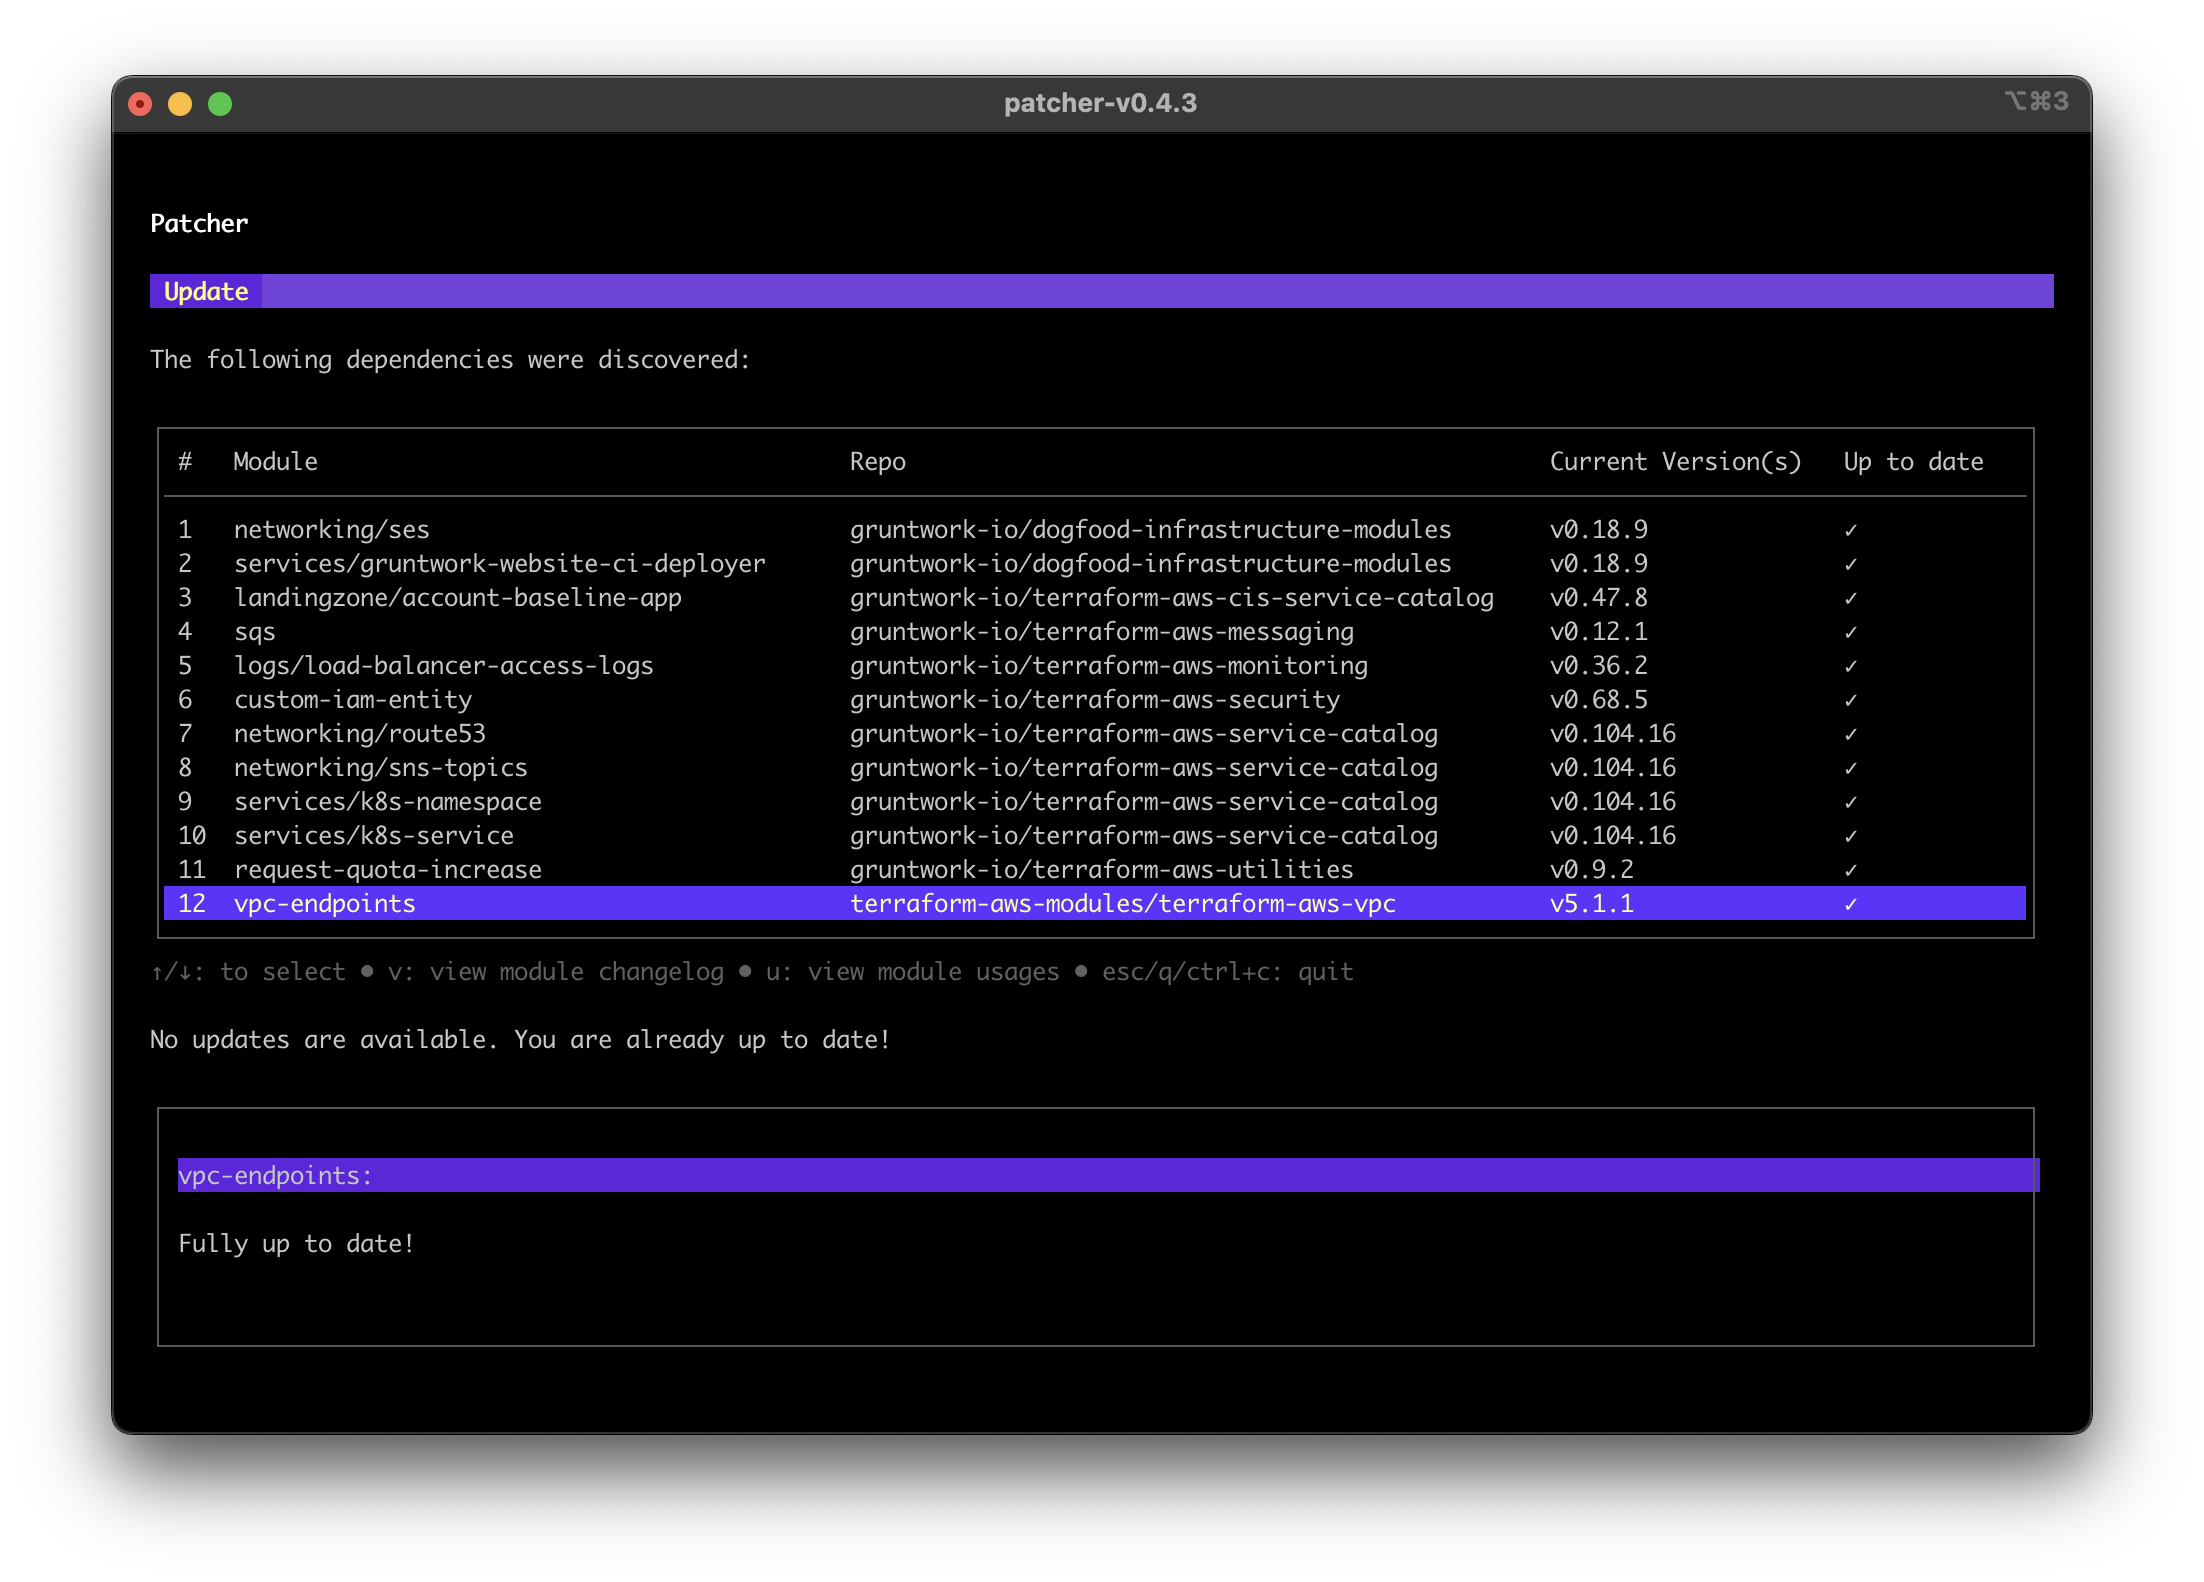 Screenshot of third party module dependency full up to date